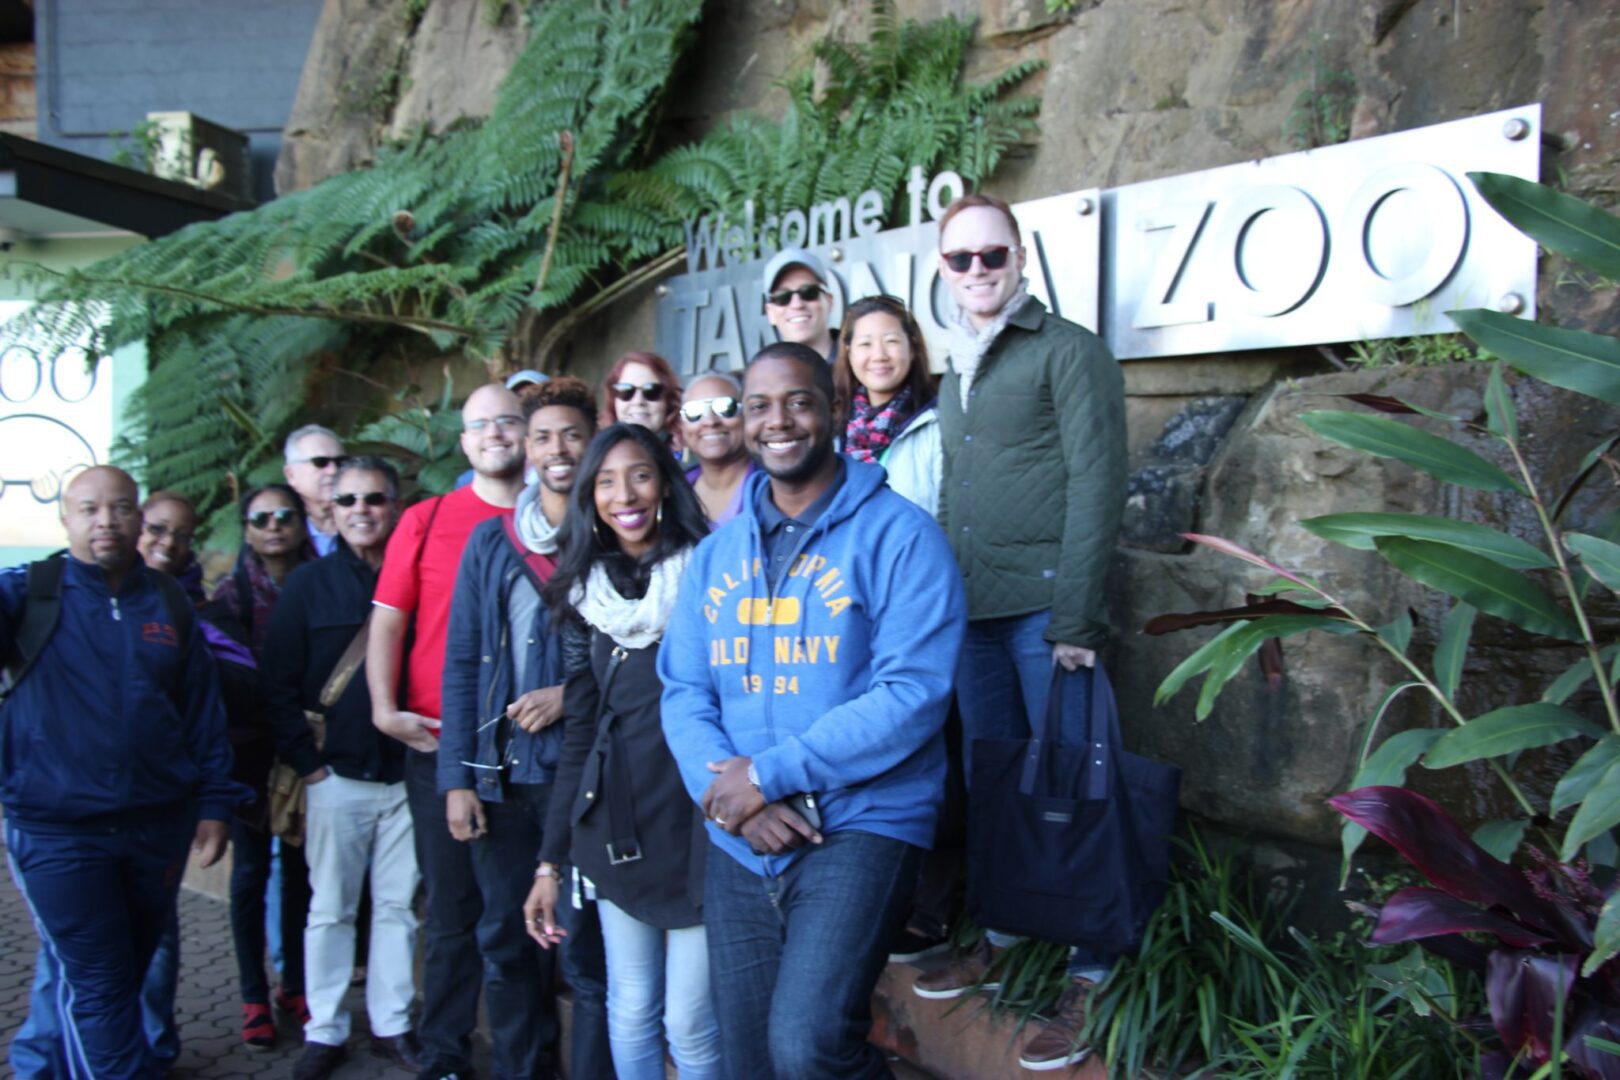 A group of people standing in front of a zoo sign.